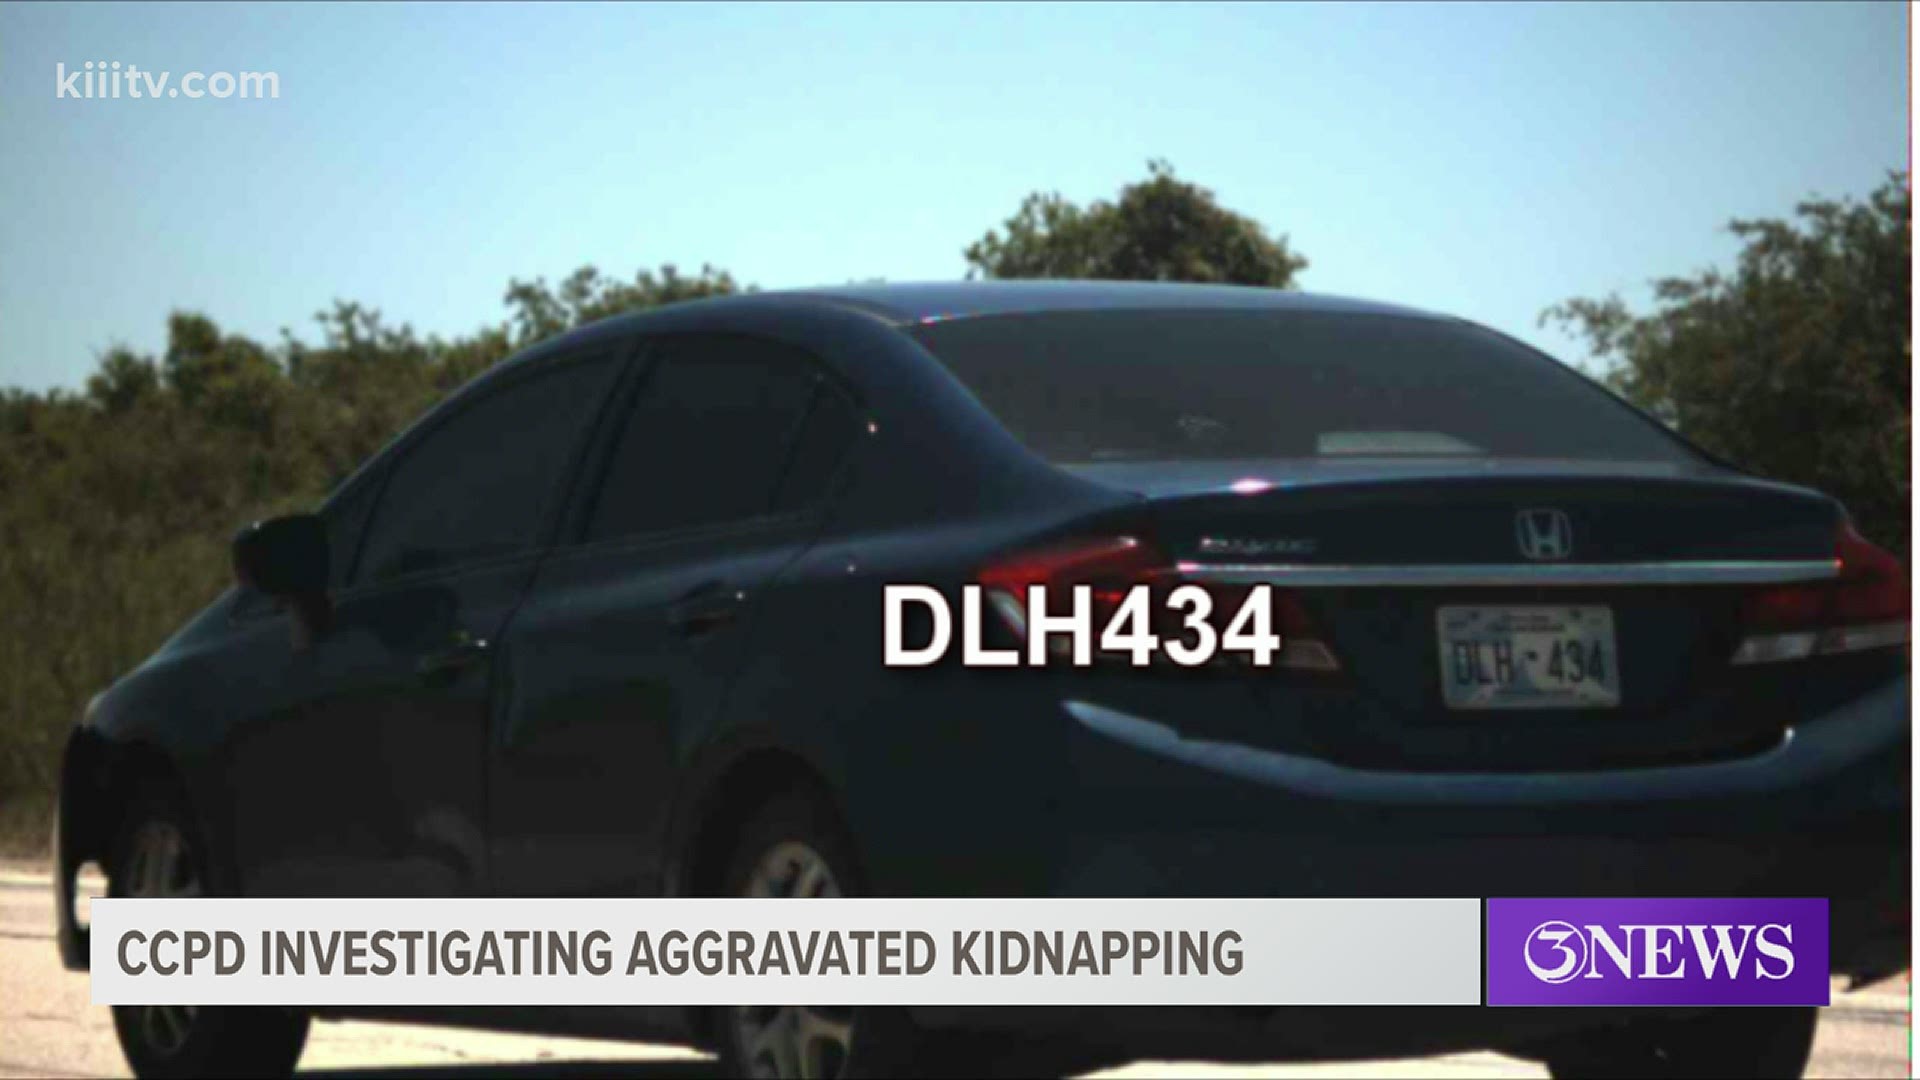 According to witnesses, Hutchins told Hernandez to leave with him at gunpoint. They were last seen in a Blue 2015 Honda Civic with Oklahoma plates (DLH434).